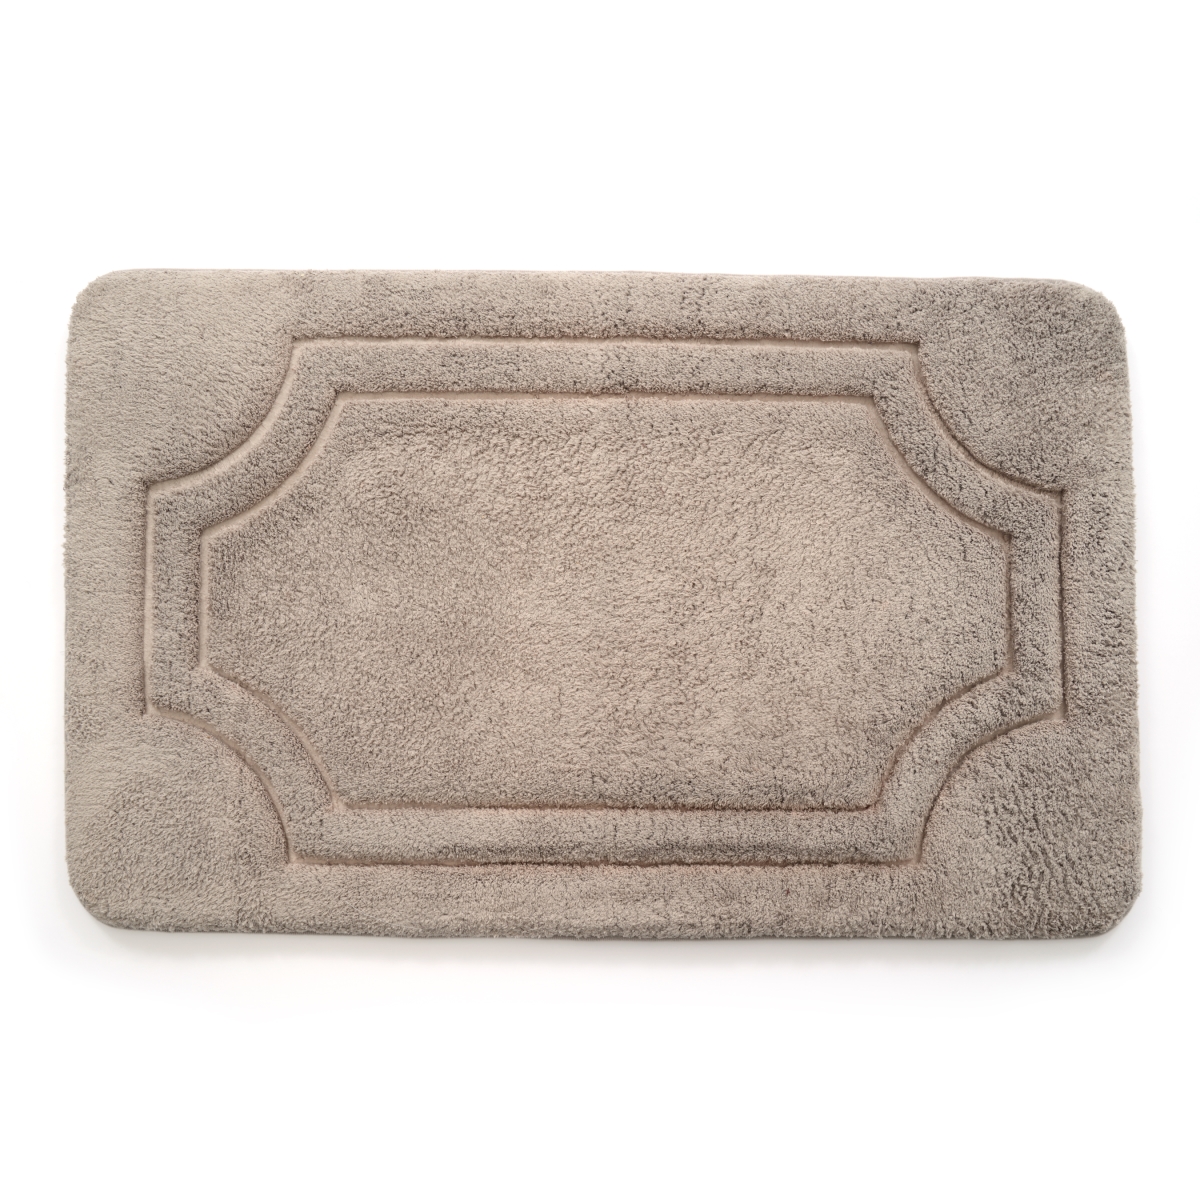 Bfdm-34c749-12 21 X 34 In. Luxurious Memory Foam Bath Mat With Water Shield Technology - Atmosphere Taupe